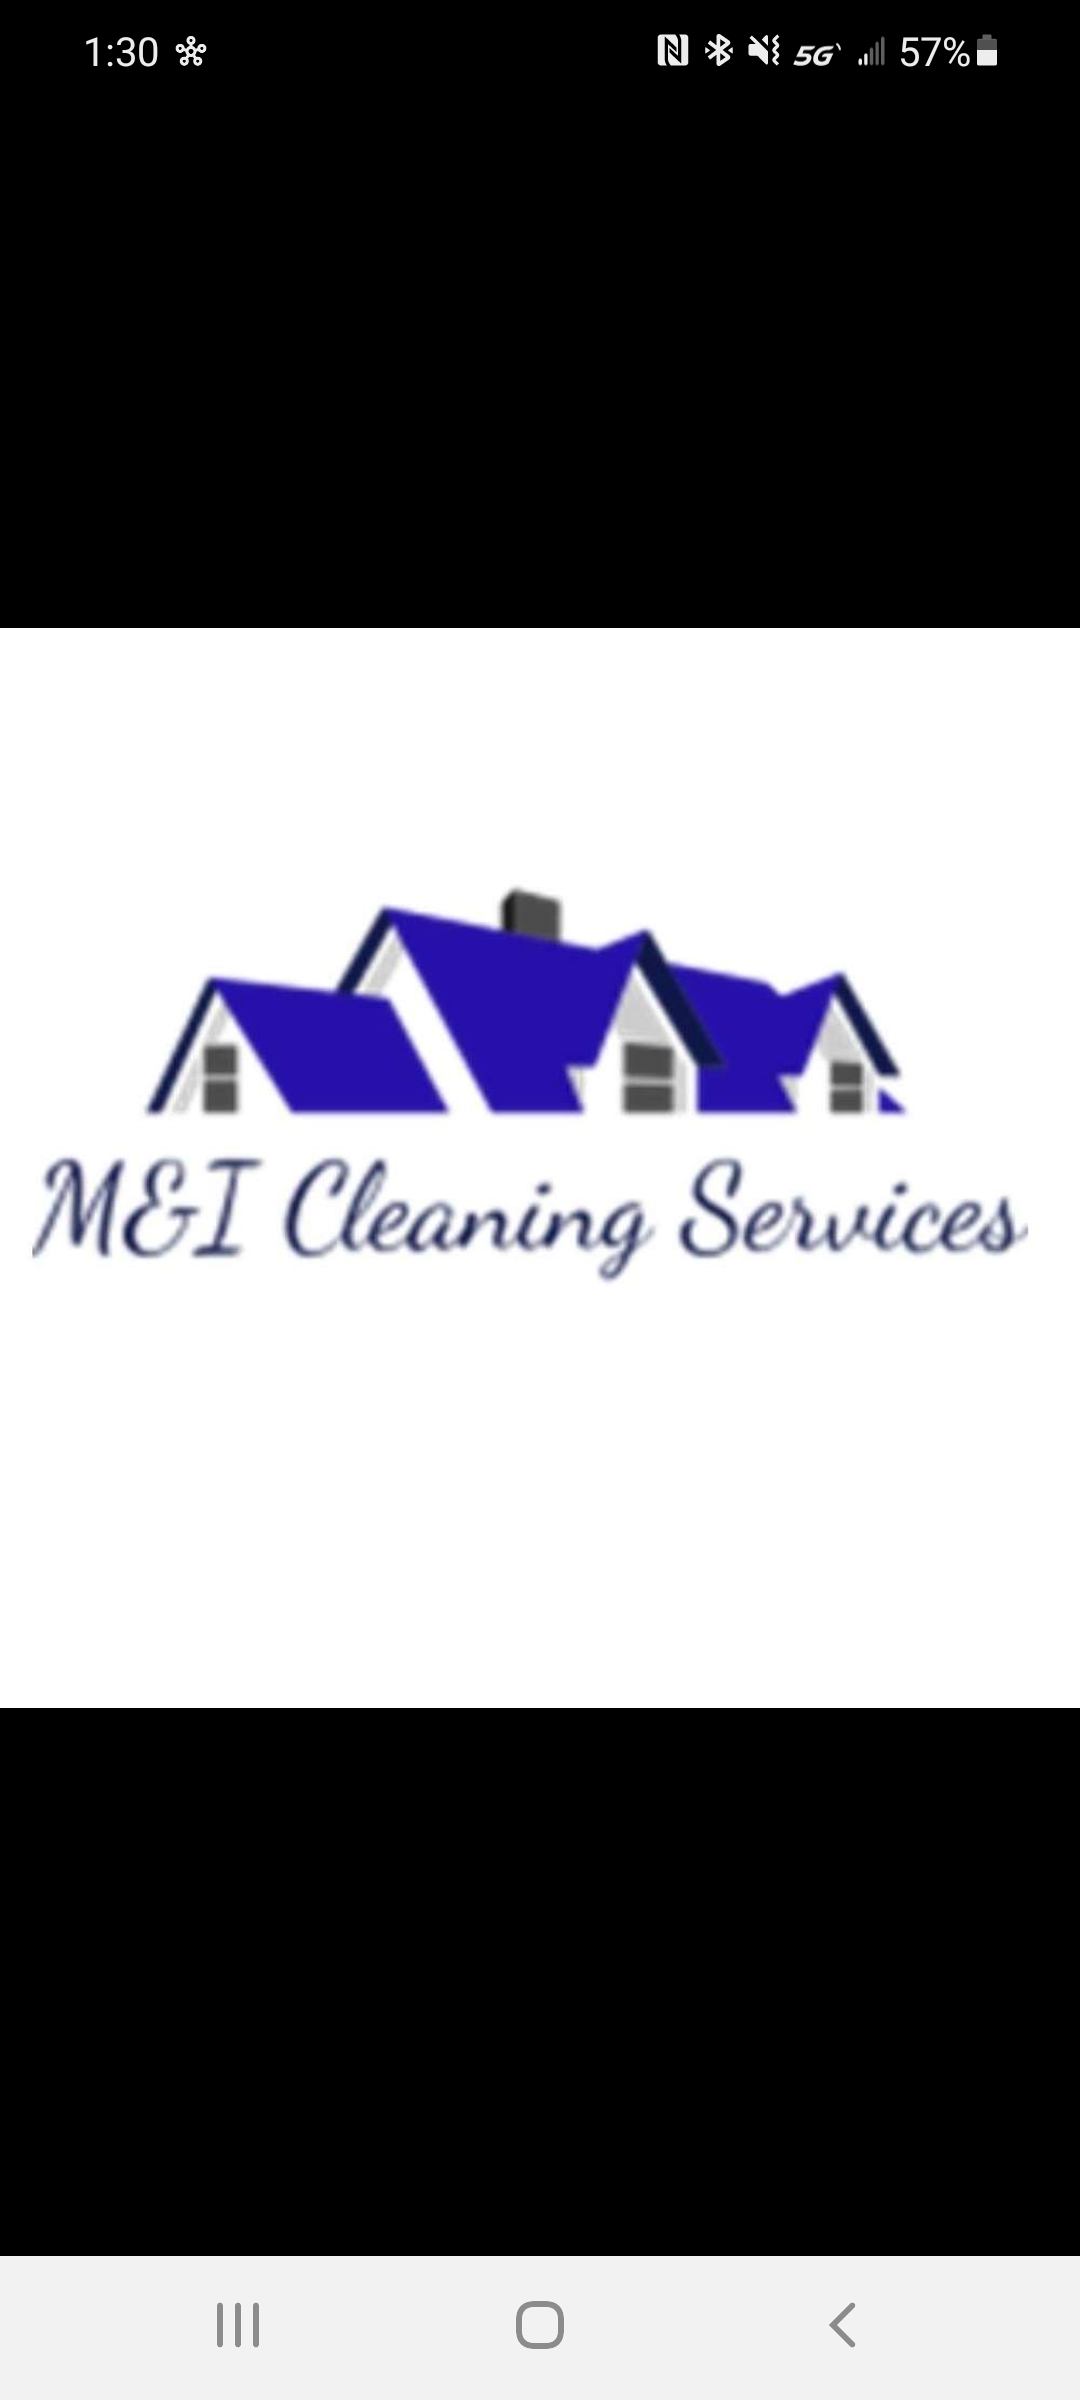 M&I Cleaning Services Logo